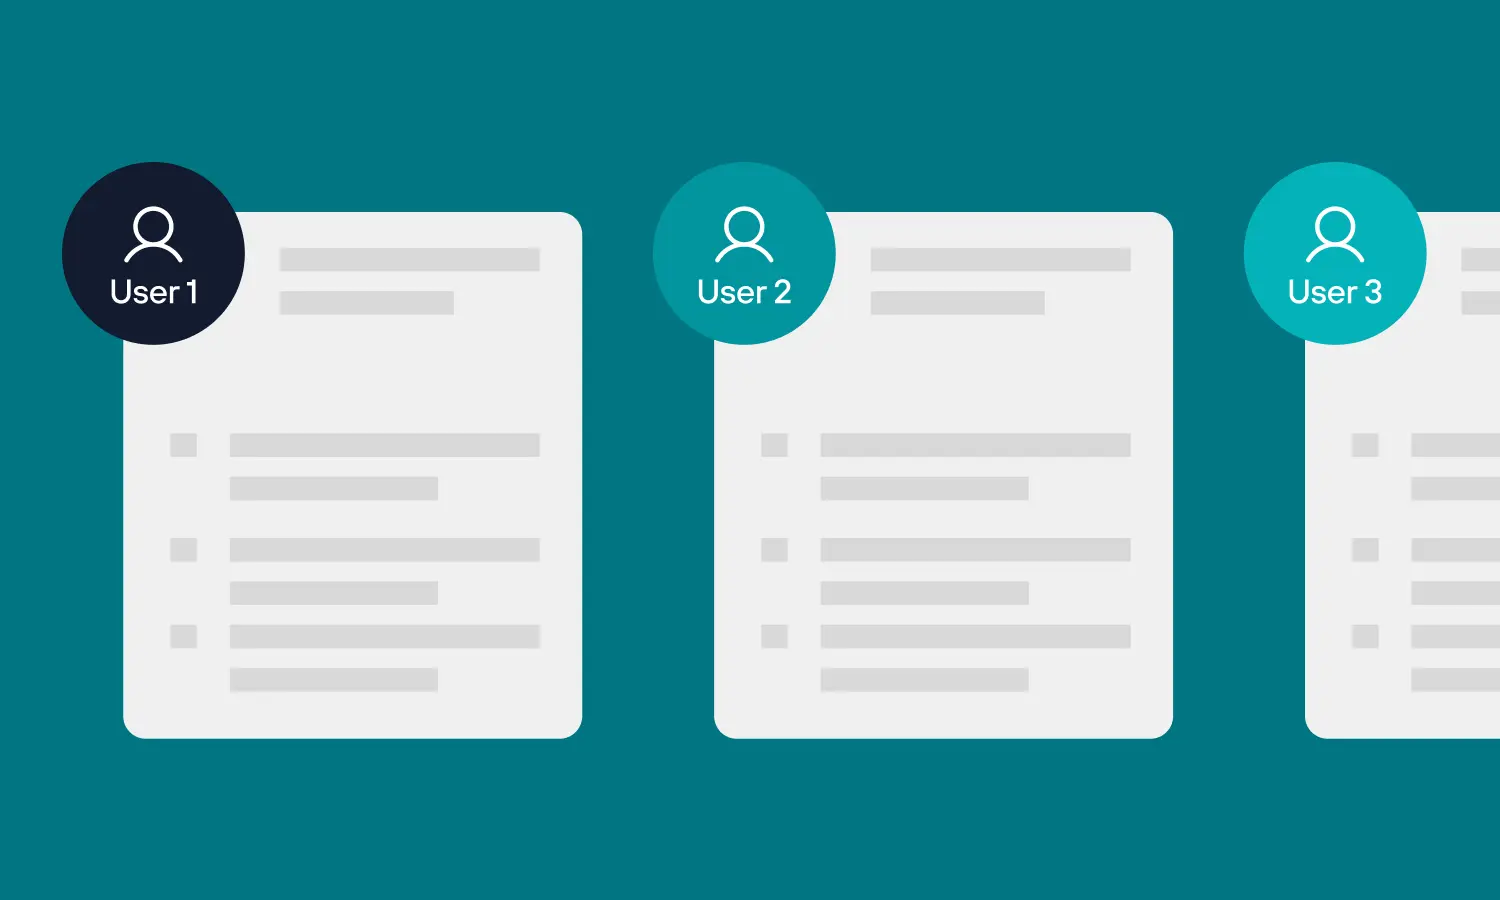 Defining and understanding your users